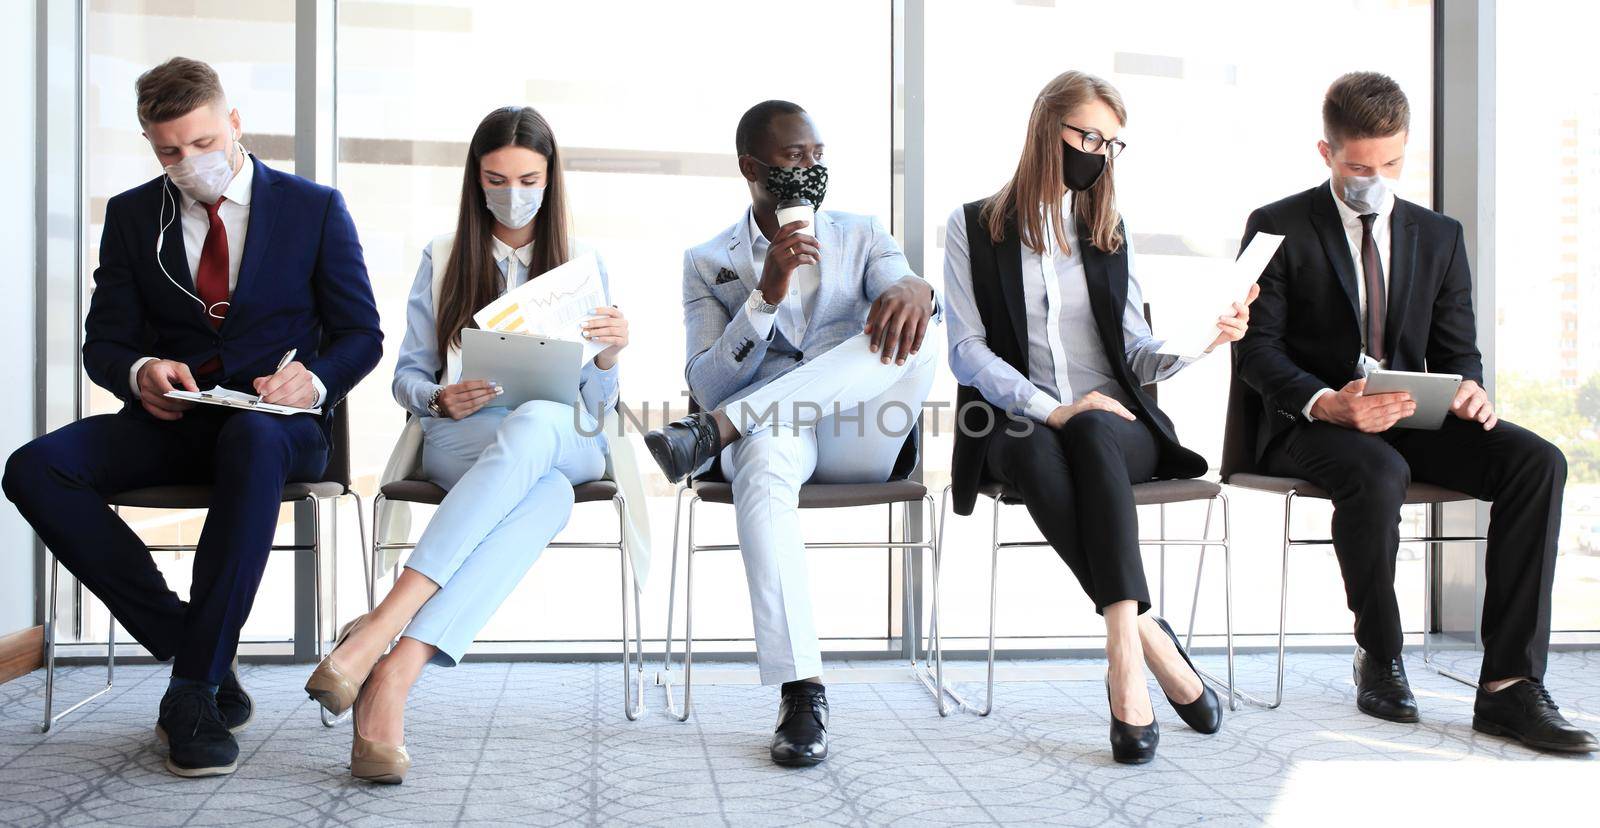 Stressful business people waiting for job interview with face mask, social distancing quarantine during COVID19 affect by tsyhun